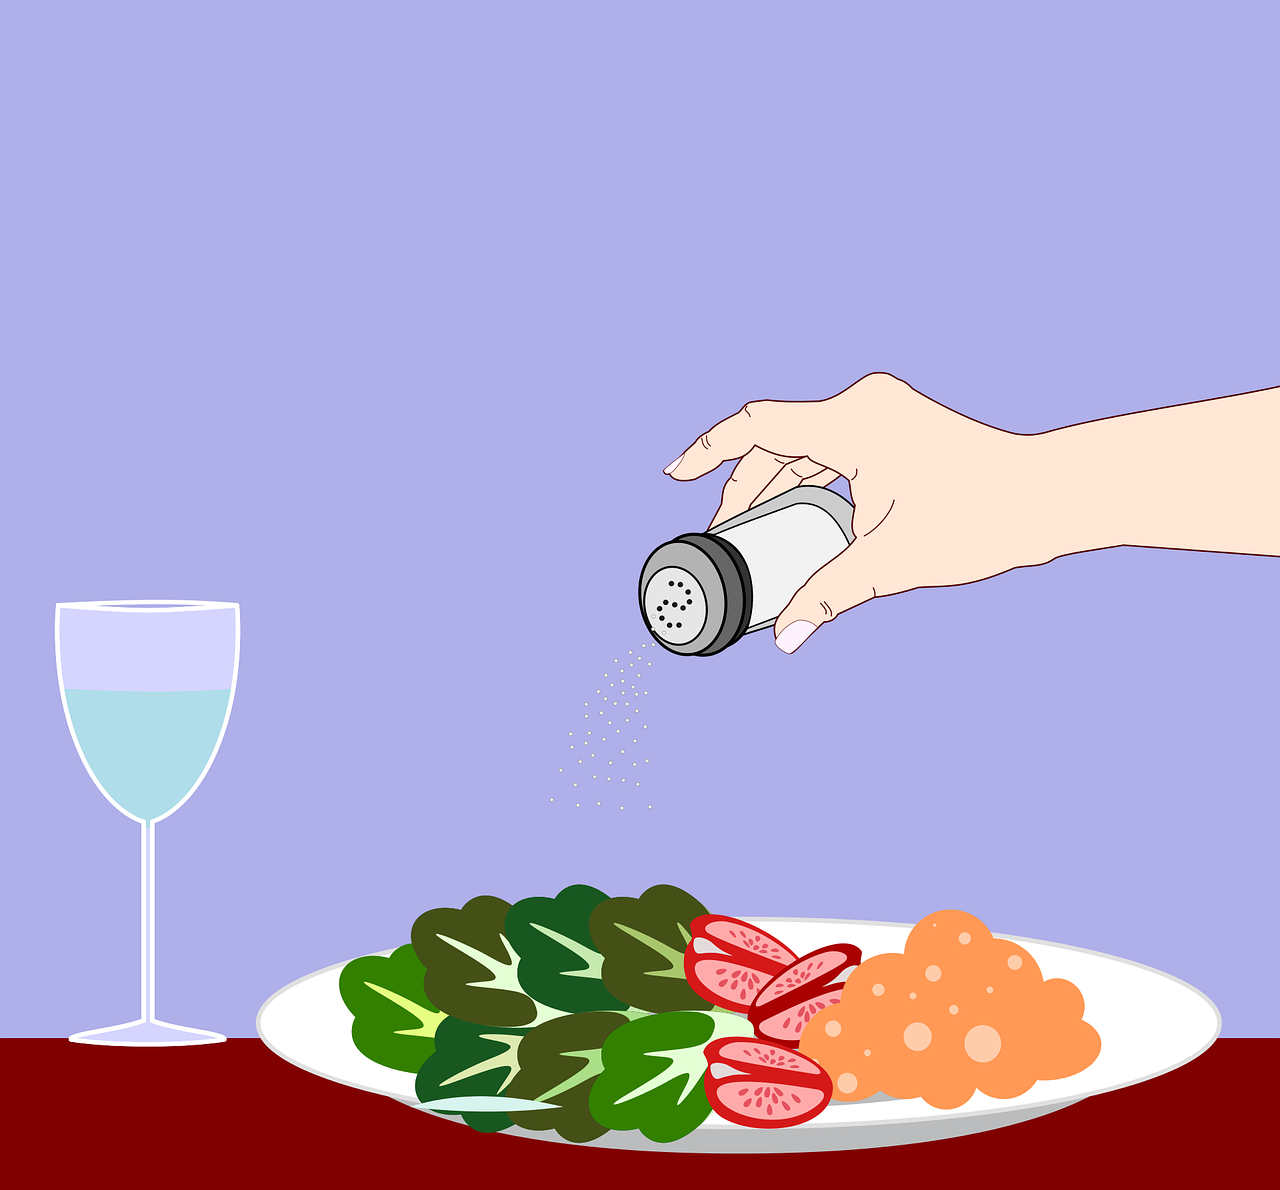 a person sprinkling salt onto a plate of food, an illustration of, usual color setting, bottle, realistic image, courful illustration